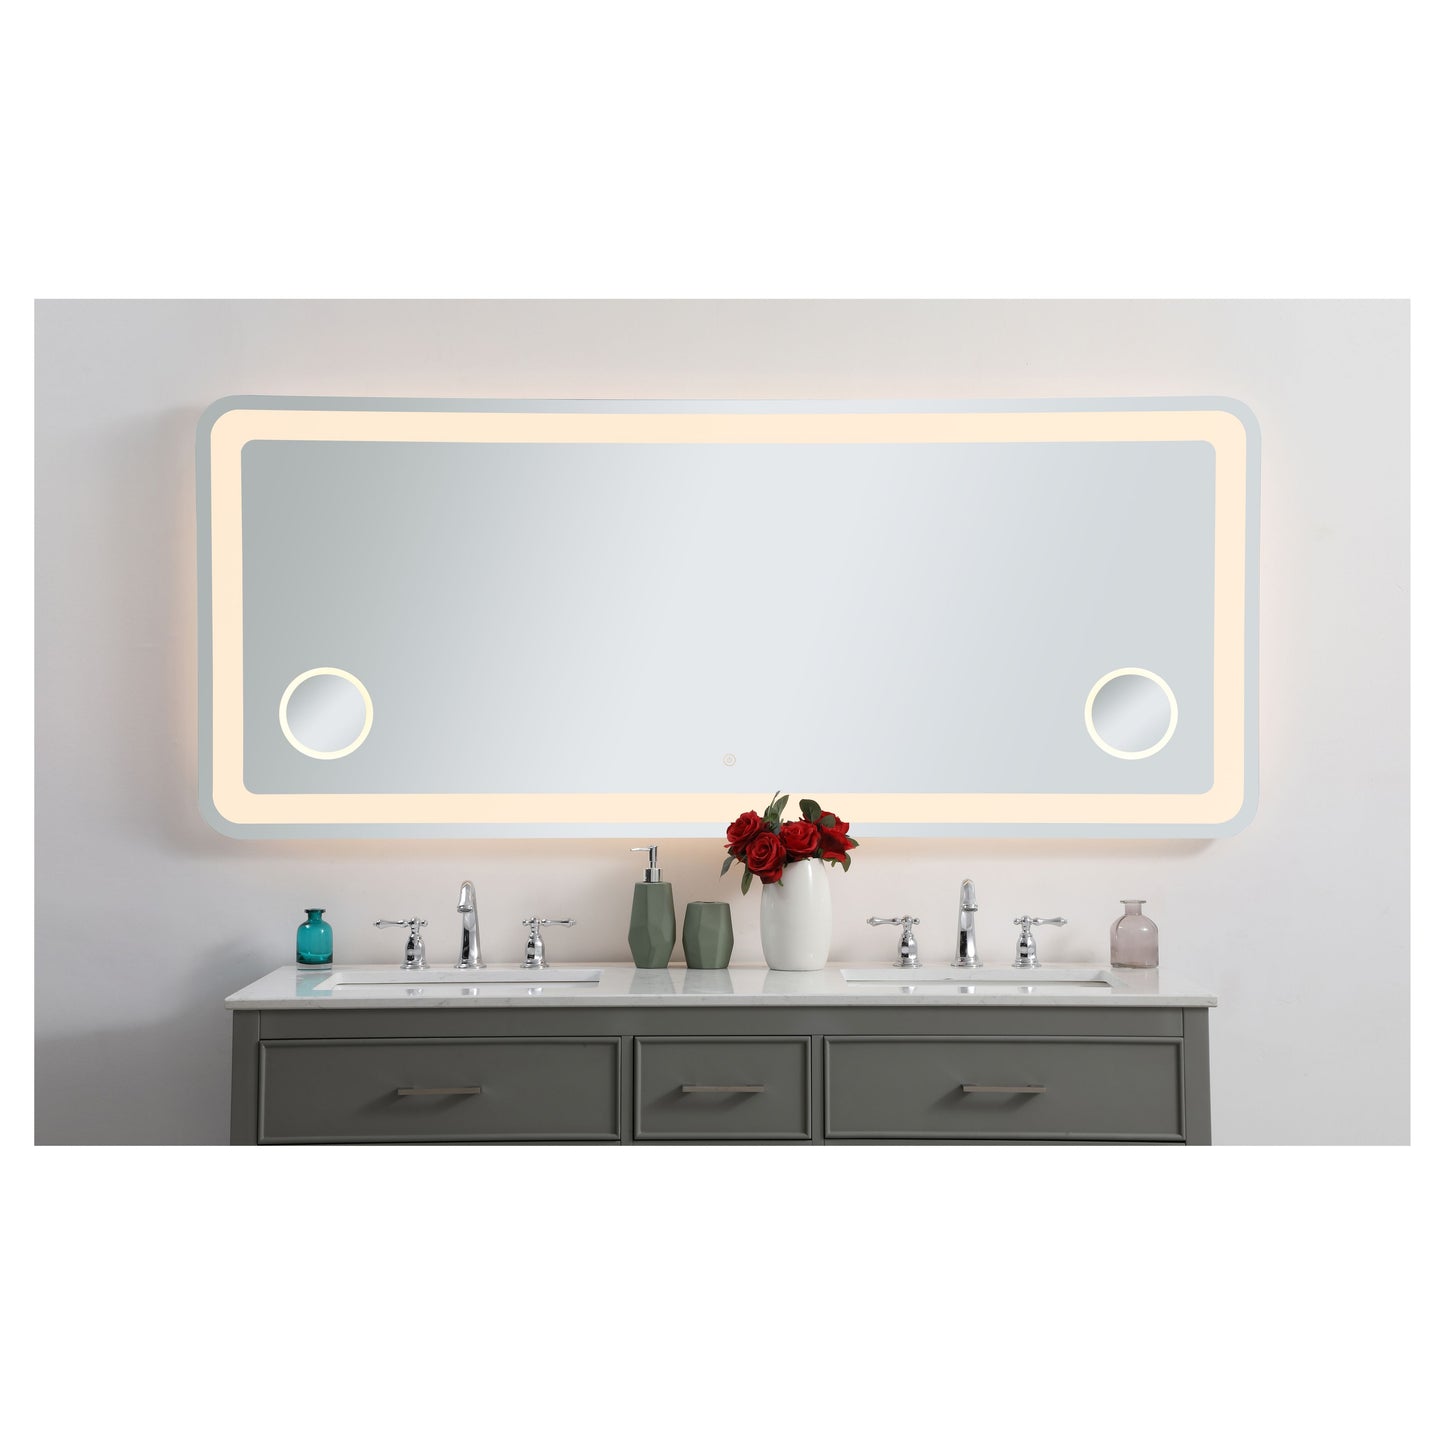 MRE53072 Lux 72" x 30" LED Mirror in Glossy White - Adjustable Color Temp